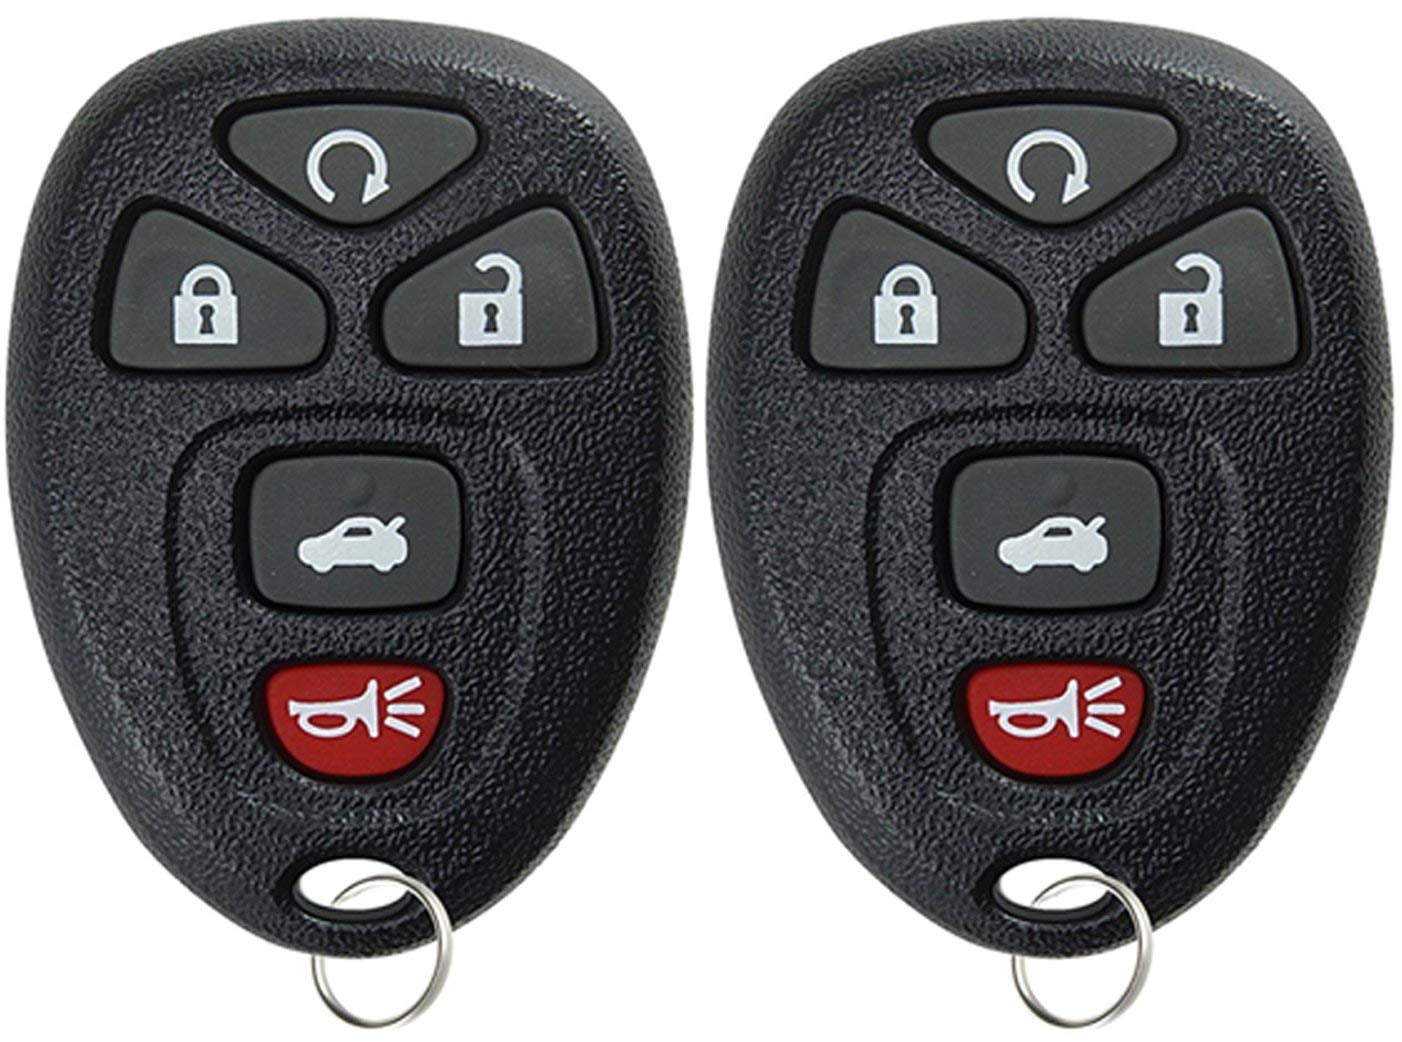 Keyless Entry Remote Control Car Key Fob Replacement for Chevy GMC M3N-32337100 4 Pack Bundle 